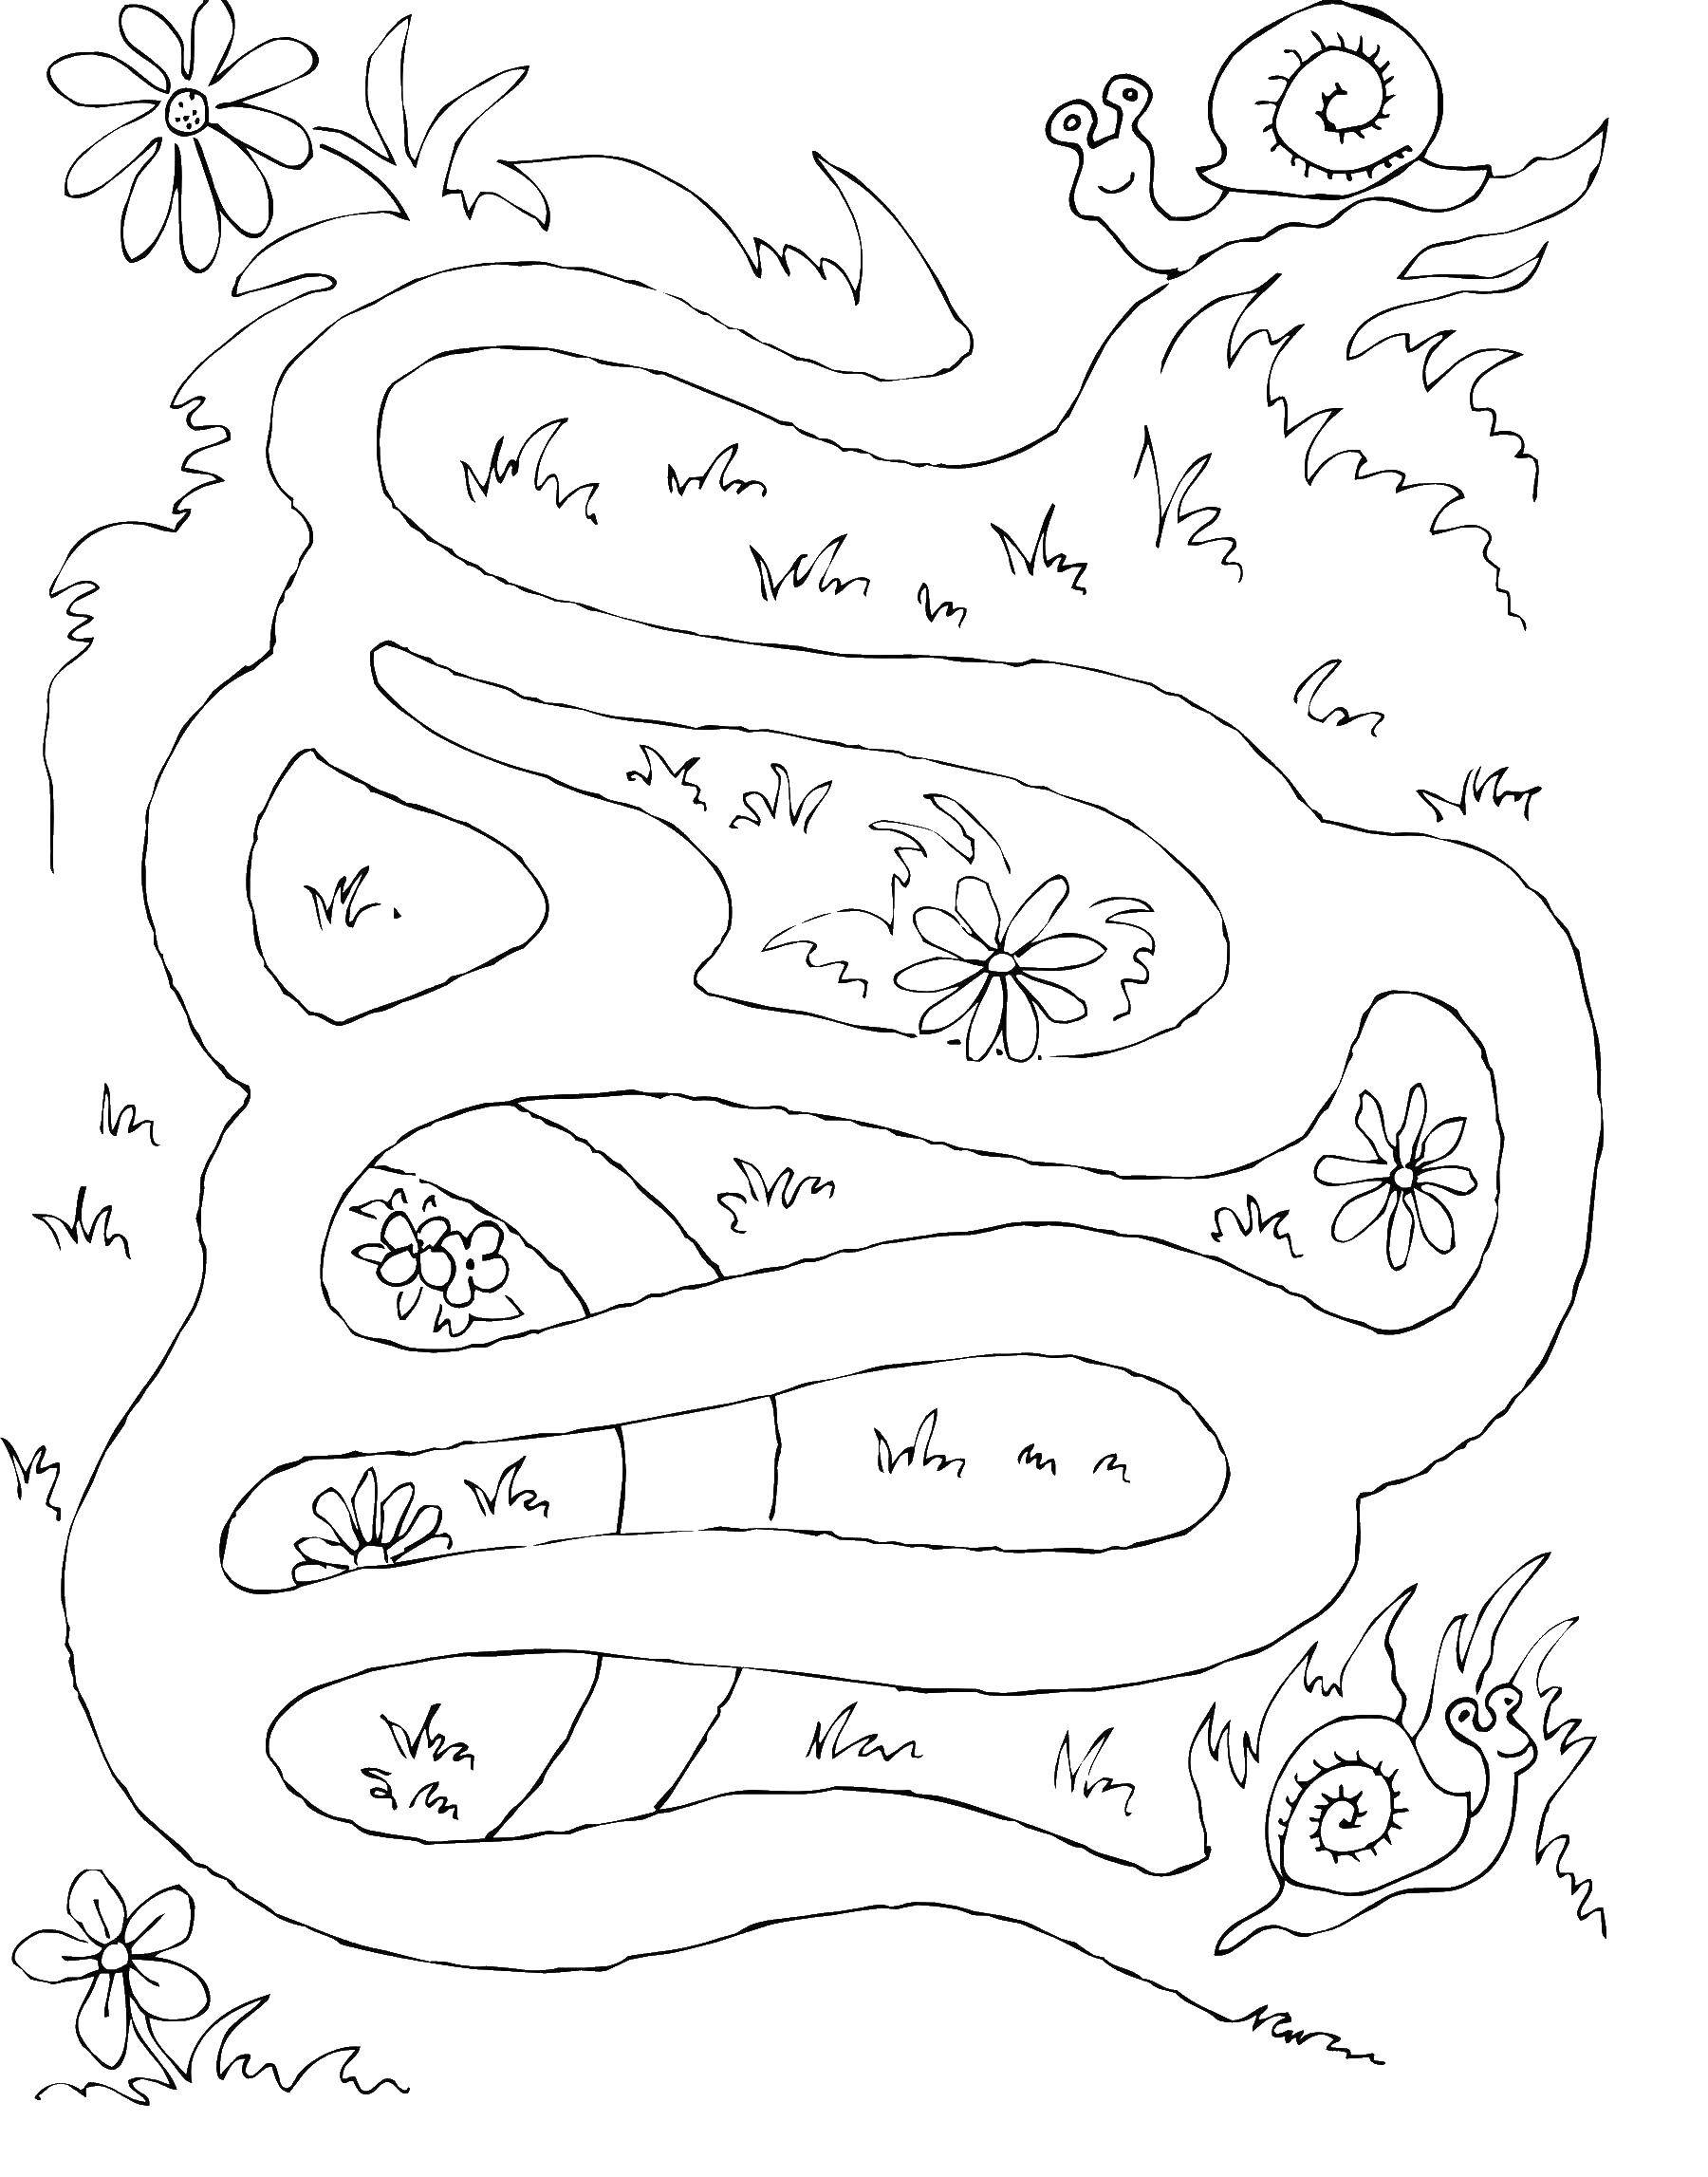 Coloring Maze of snails. Category Mazes. Tags:  maze, mazes.